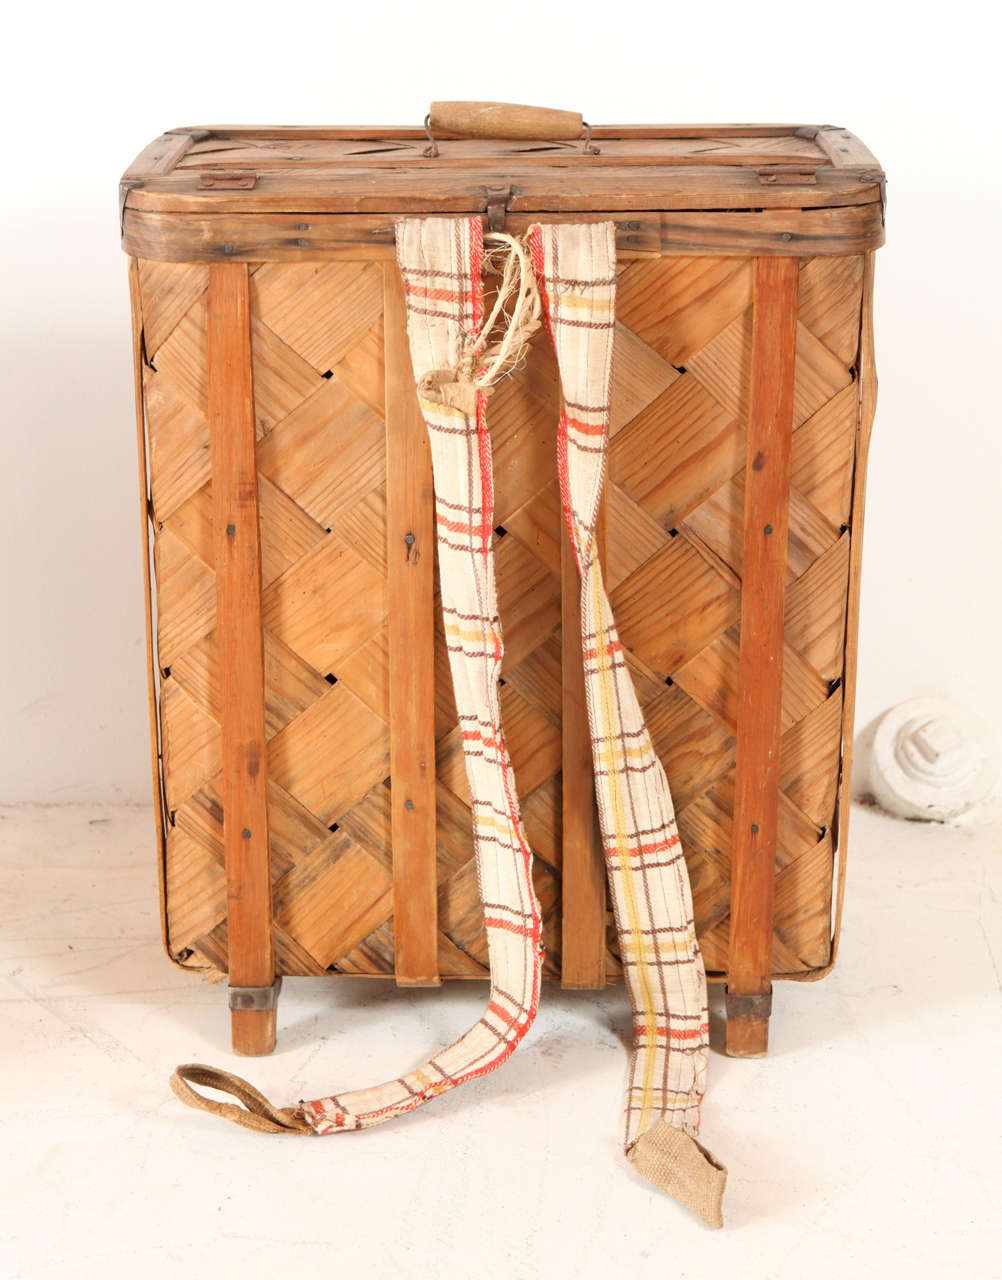 20th Century Woven Wood Hanging Baskets / Backpacks